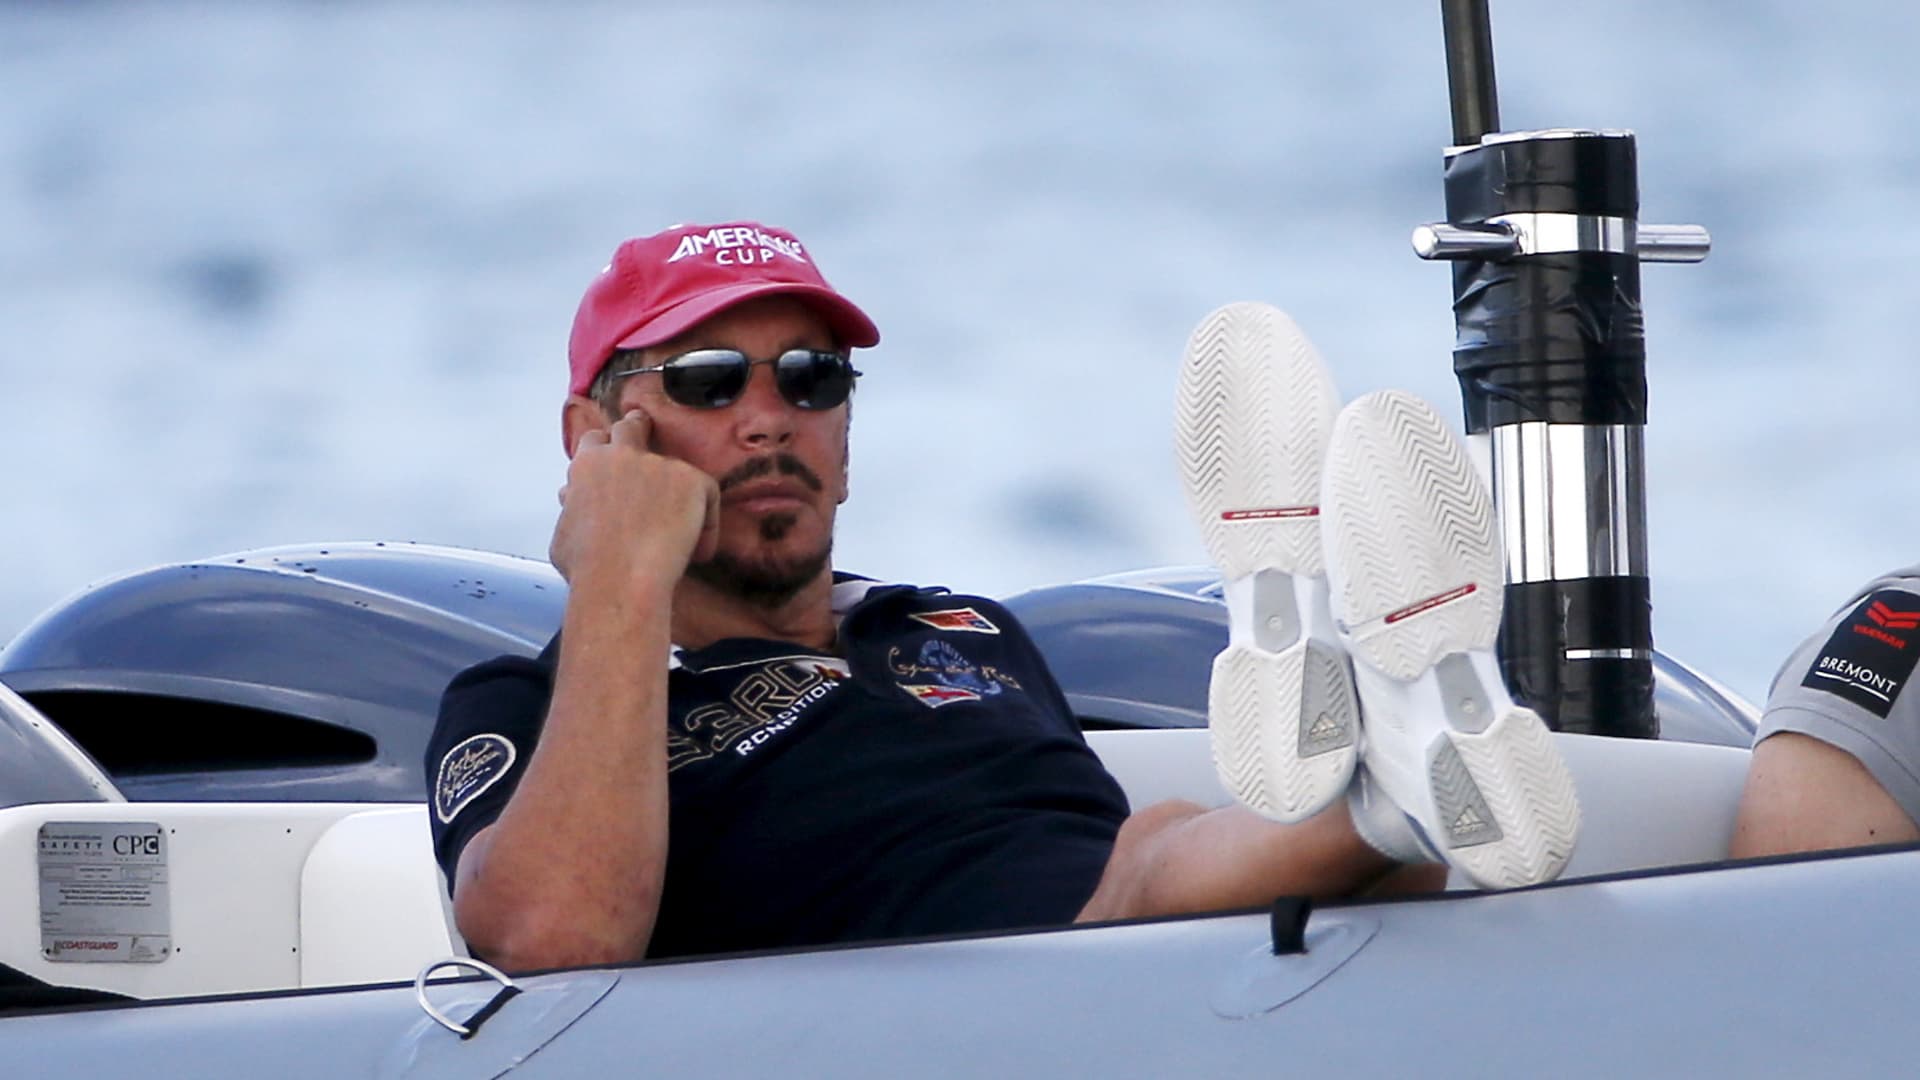 Larry Ellison, founder and former CEO of Oracle Inc. watches a training race from a motor boat ahead of the America's Cup World Series sailing competition on the Great Sound in Hamilton, Bermuda, October 16, 2015.